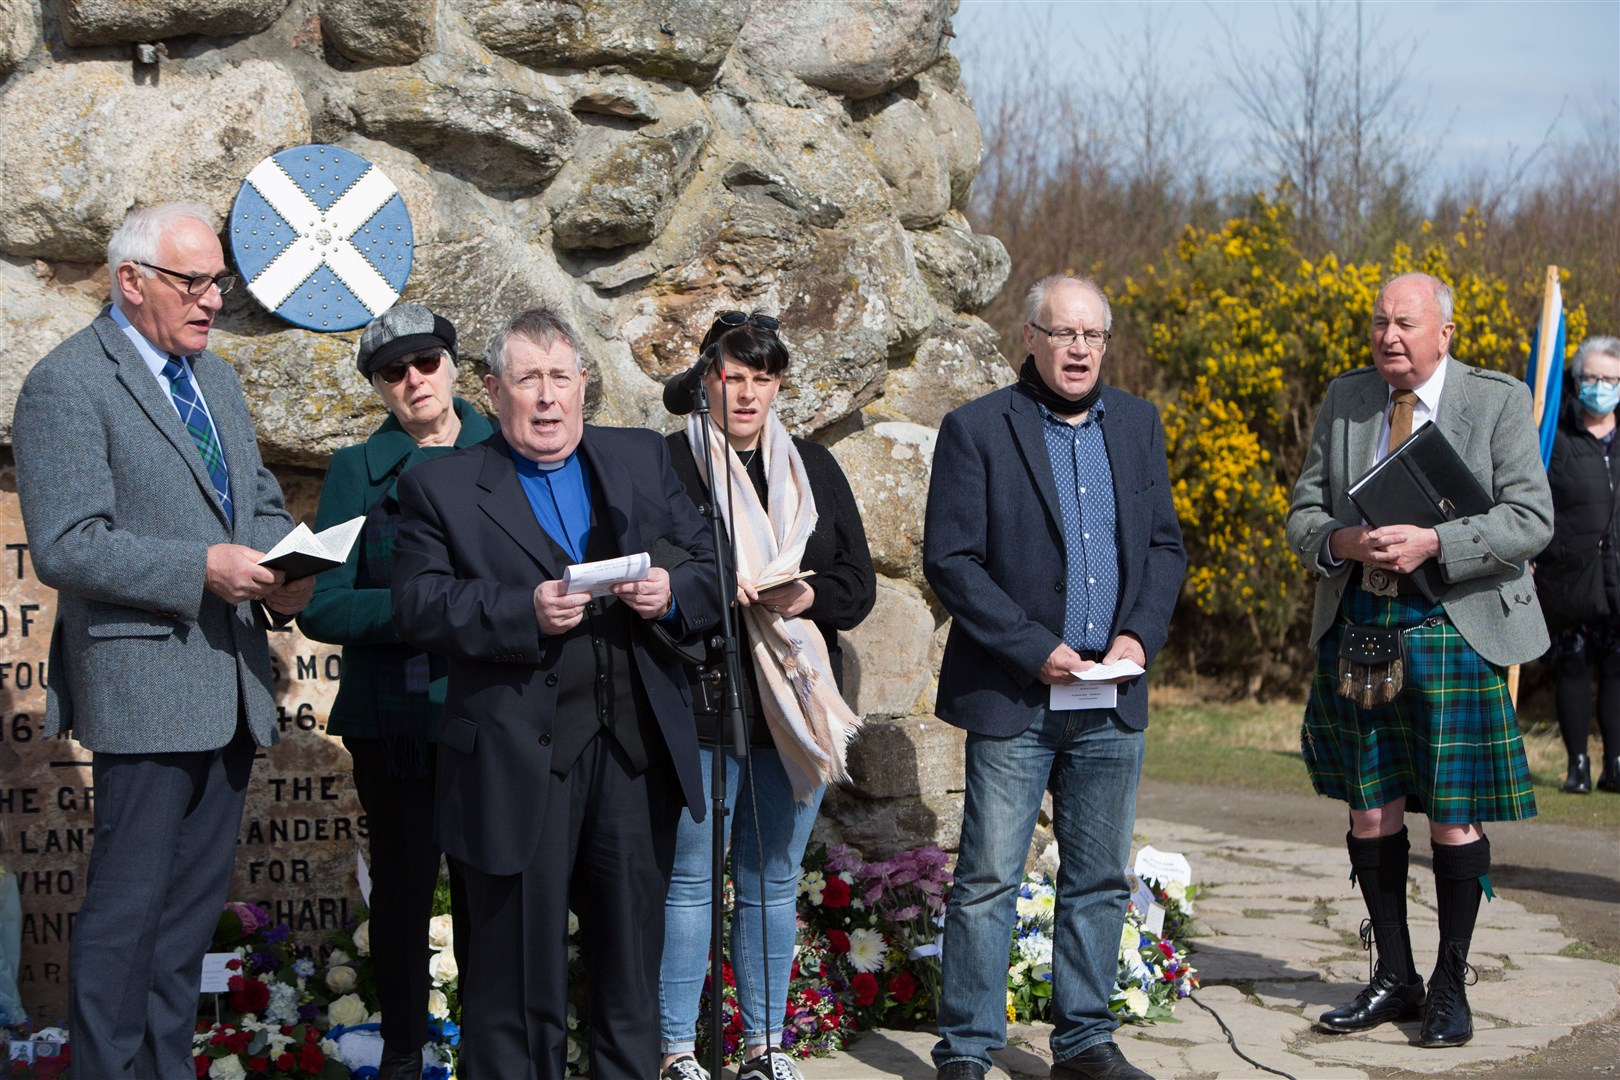 A service was held by the Gaelic Society of Inverness to commemorate the Battle of Culloden.